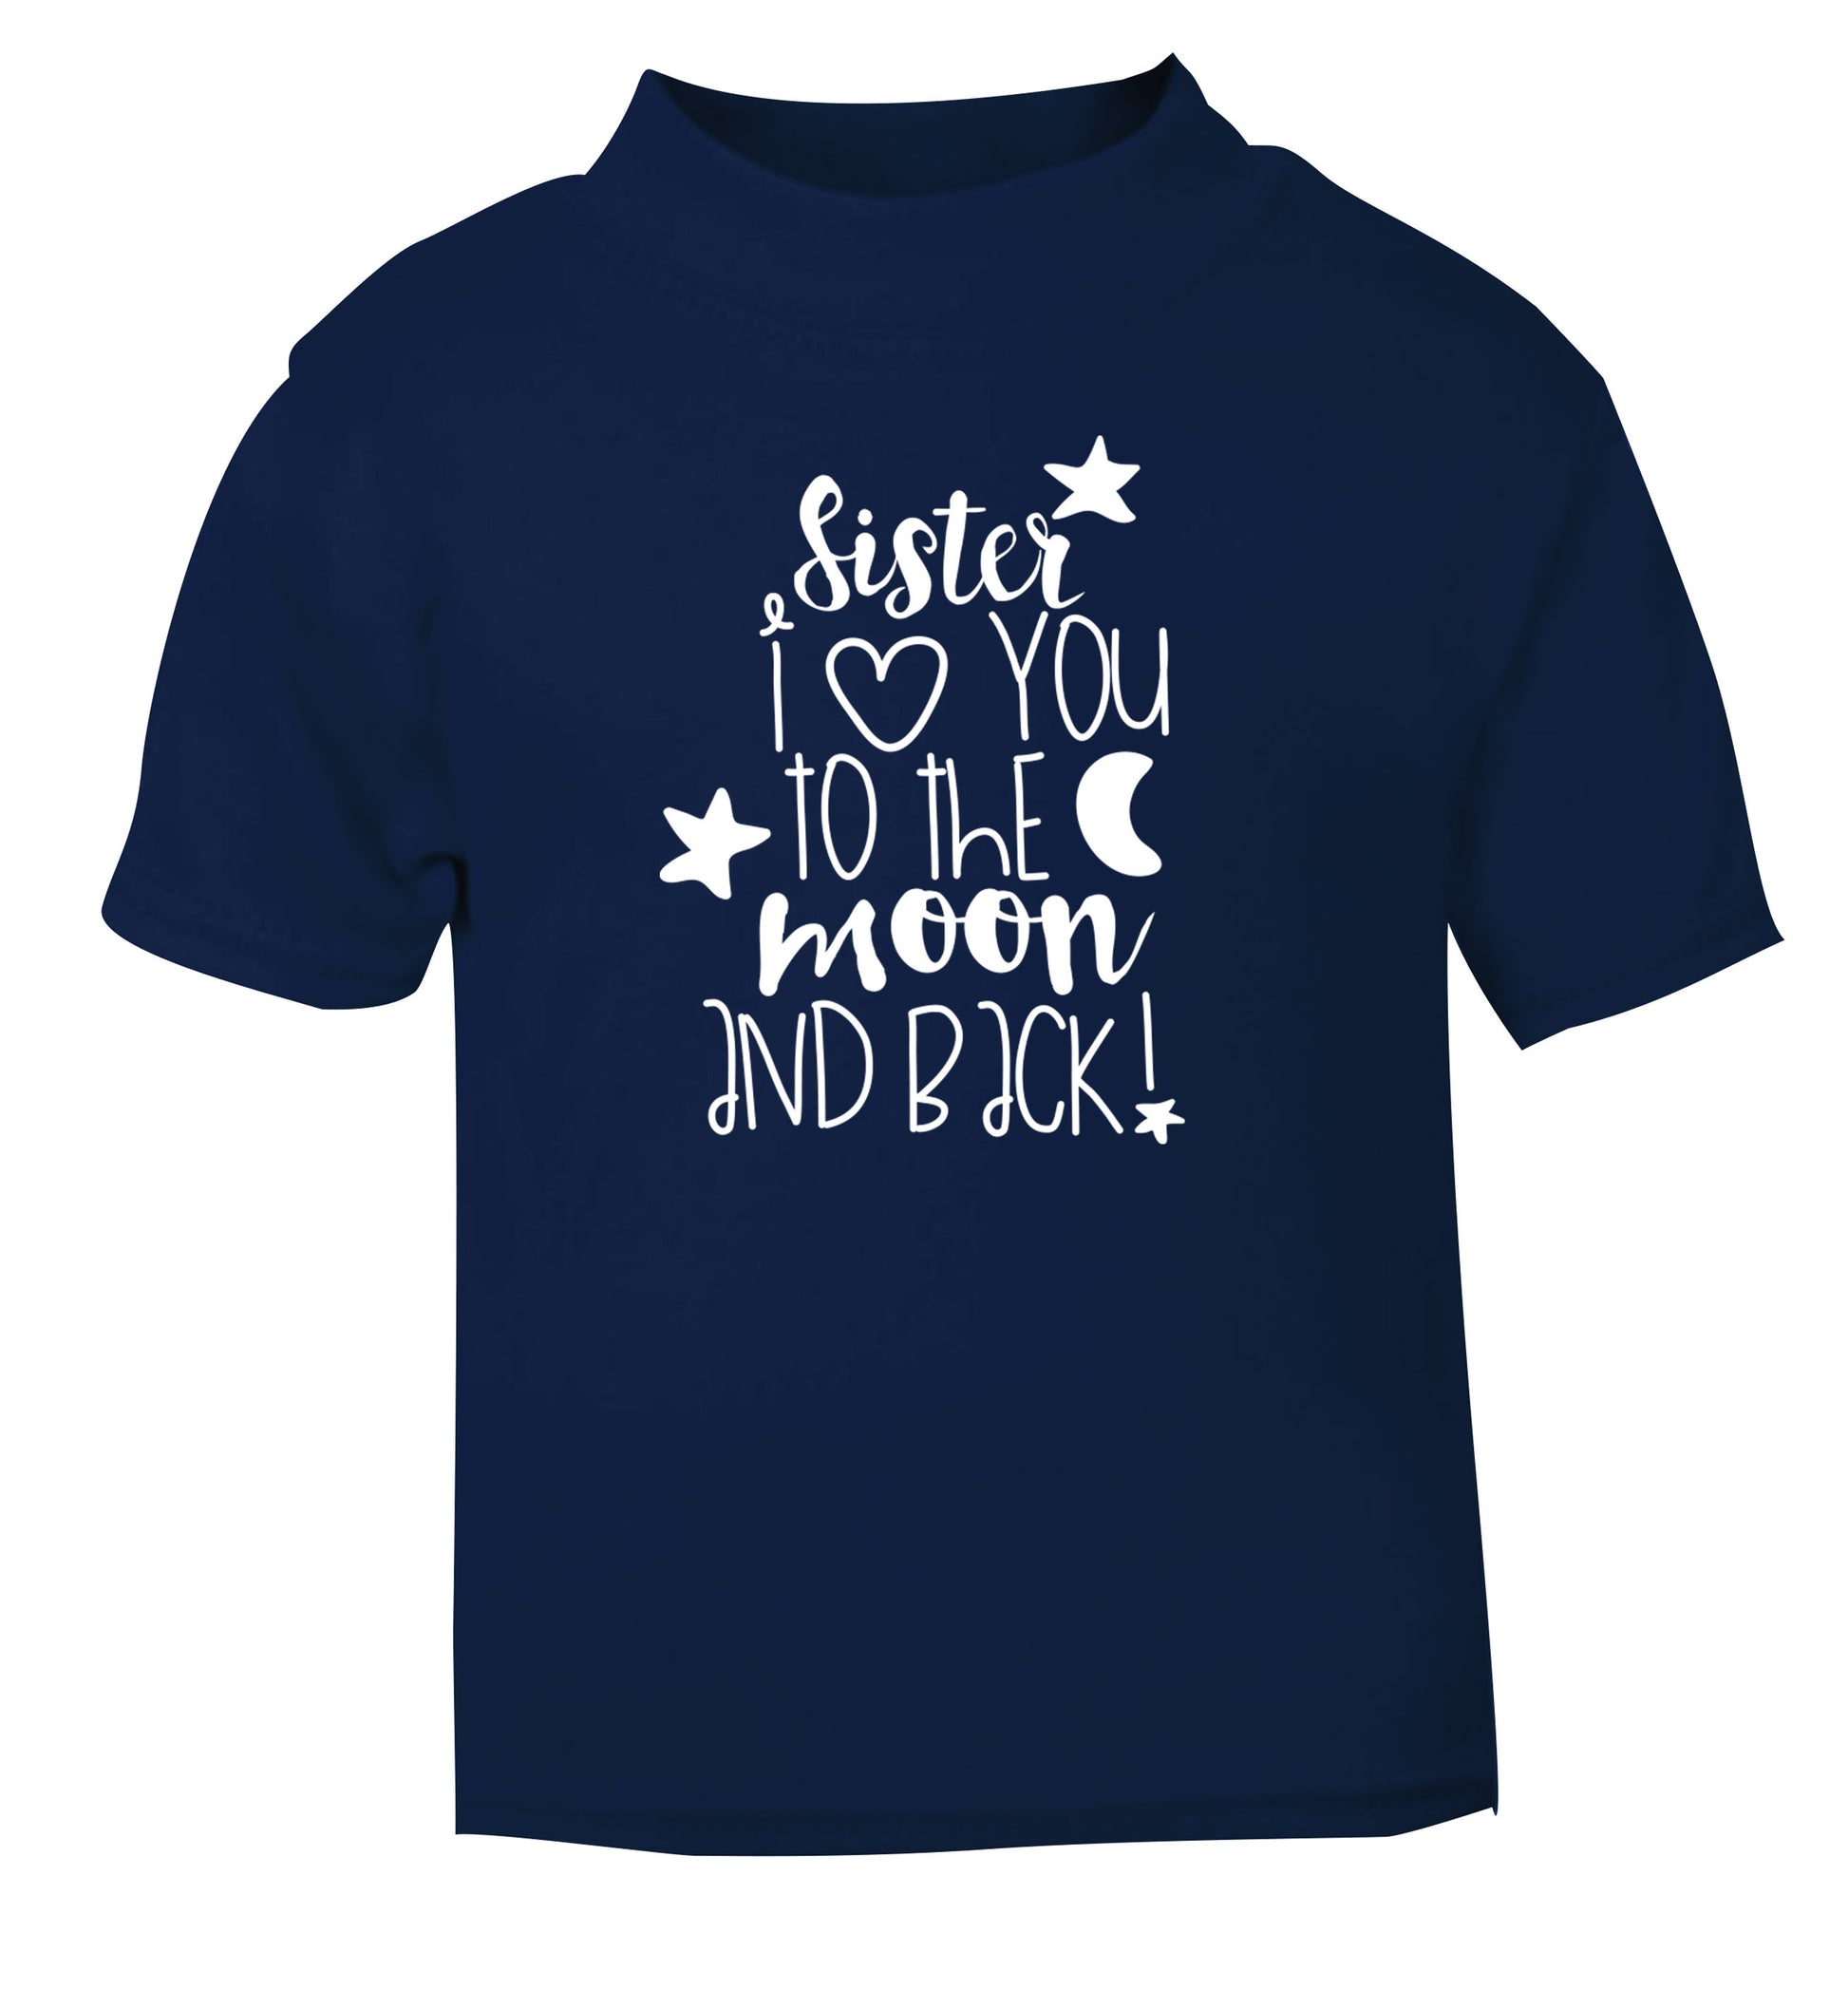 Sister I love you to the moon and back navy Baby Toddler Tshirt 2 Years